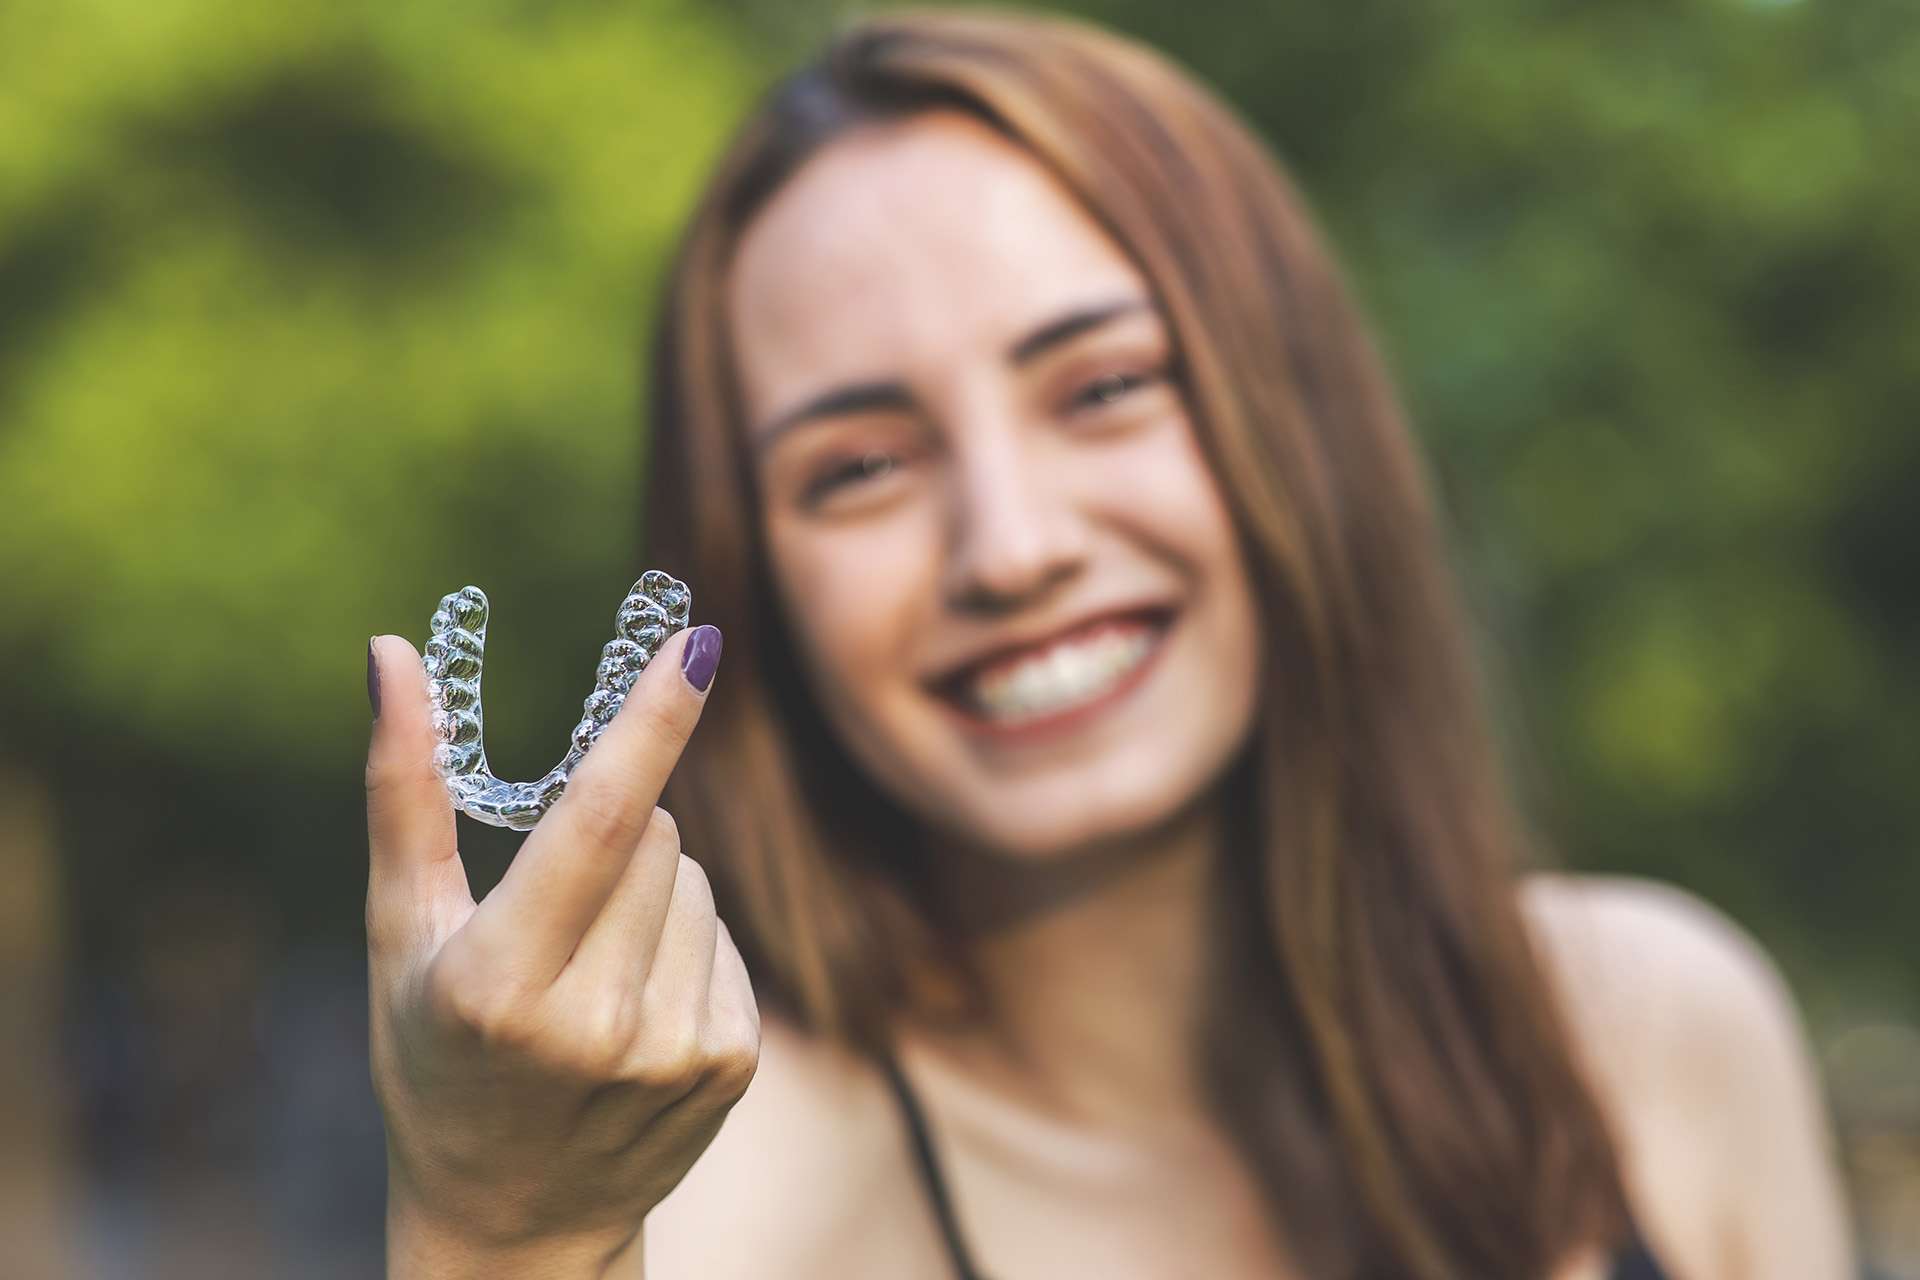 Smiling woman is holding an clear aligners